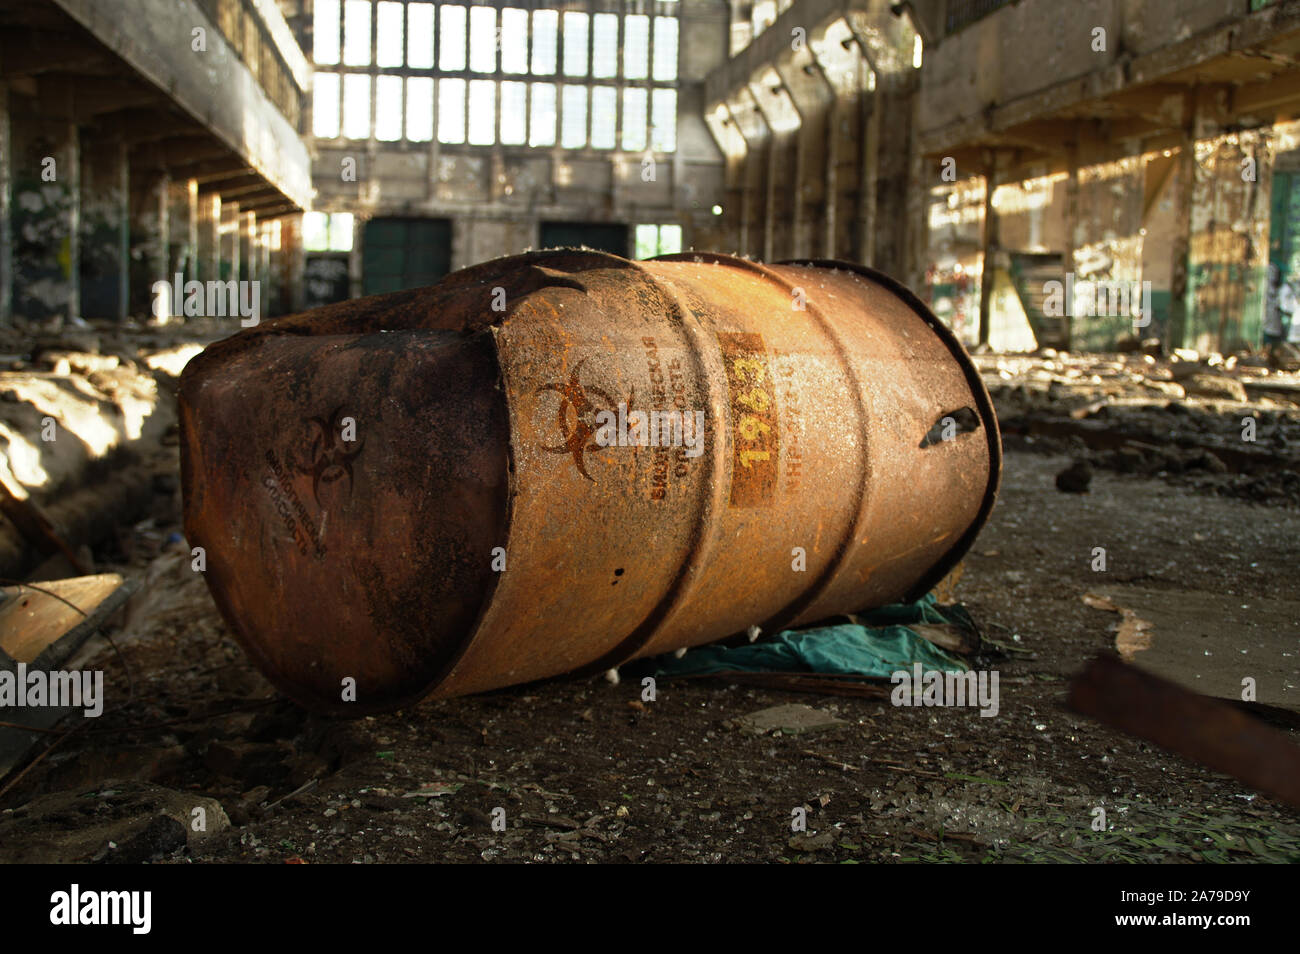 Radioactive warning on old rusty barrel in destroyed and forgotten building. Radiation symbol with russian alert on waste container after nuclear disa Stock Photo